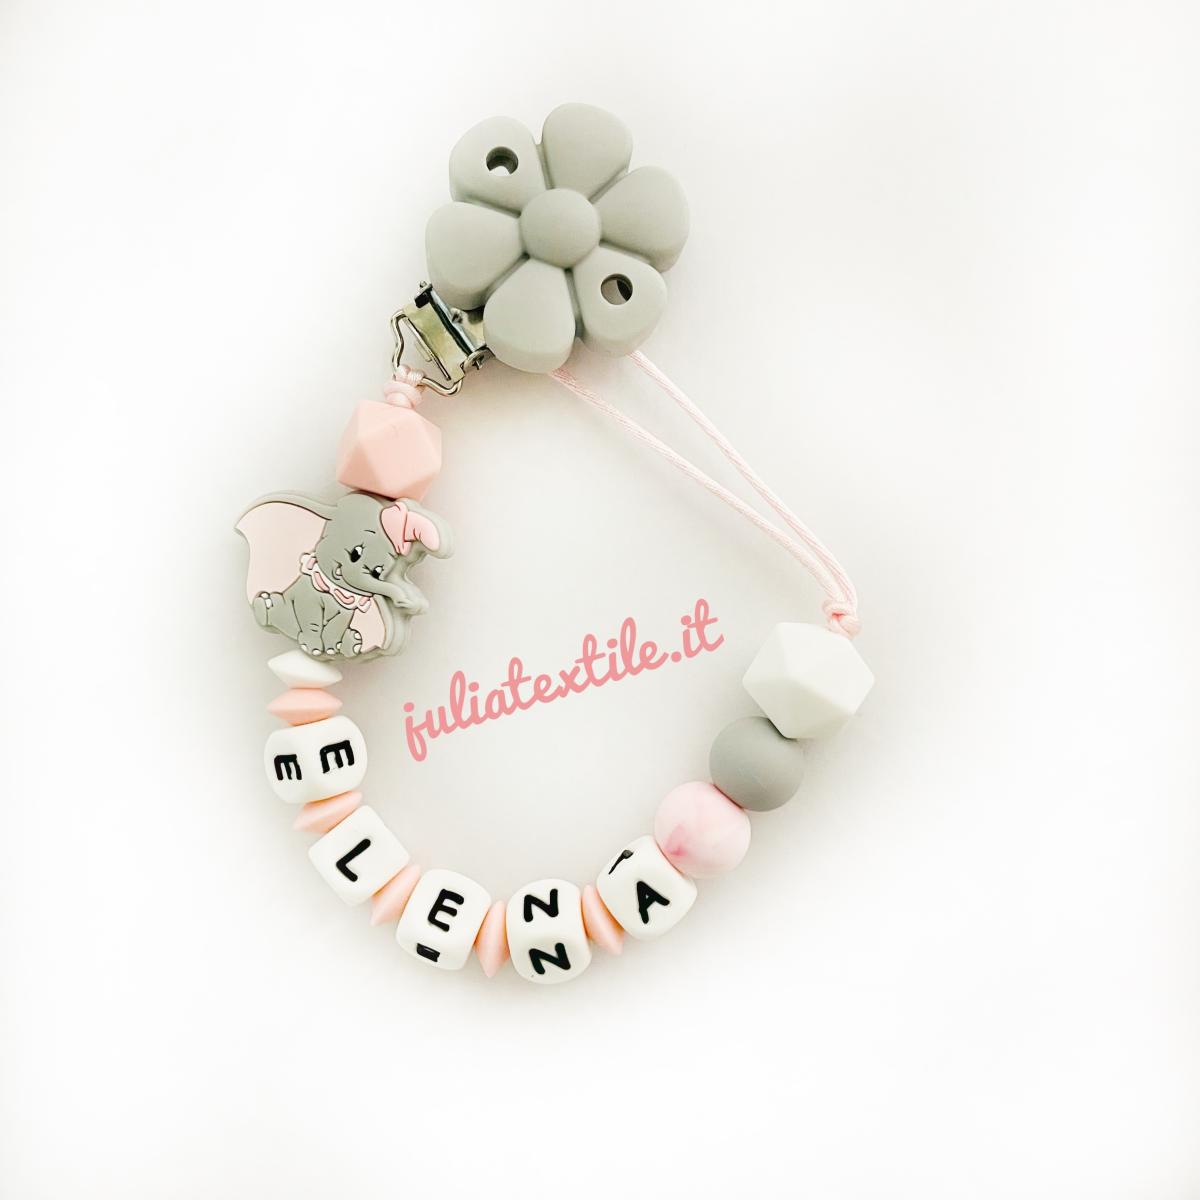 Name Chain with Gray Flower and Pink White Dumbo